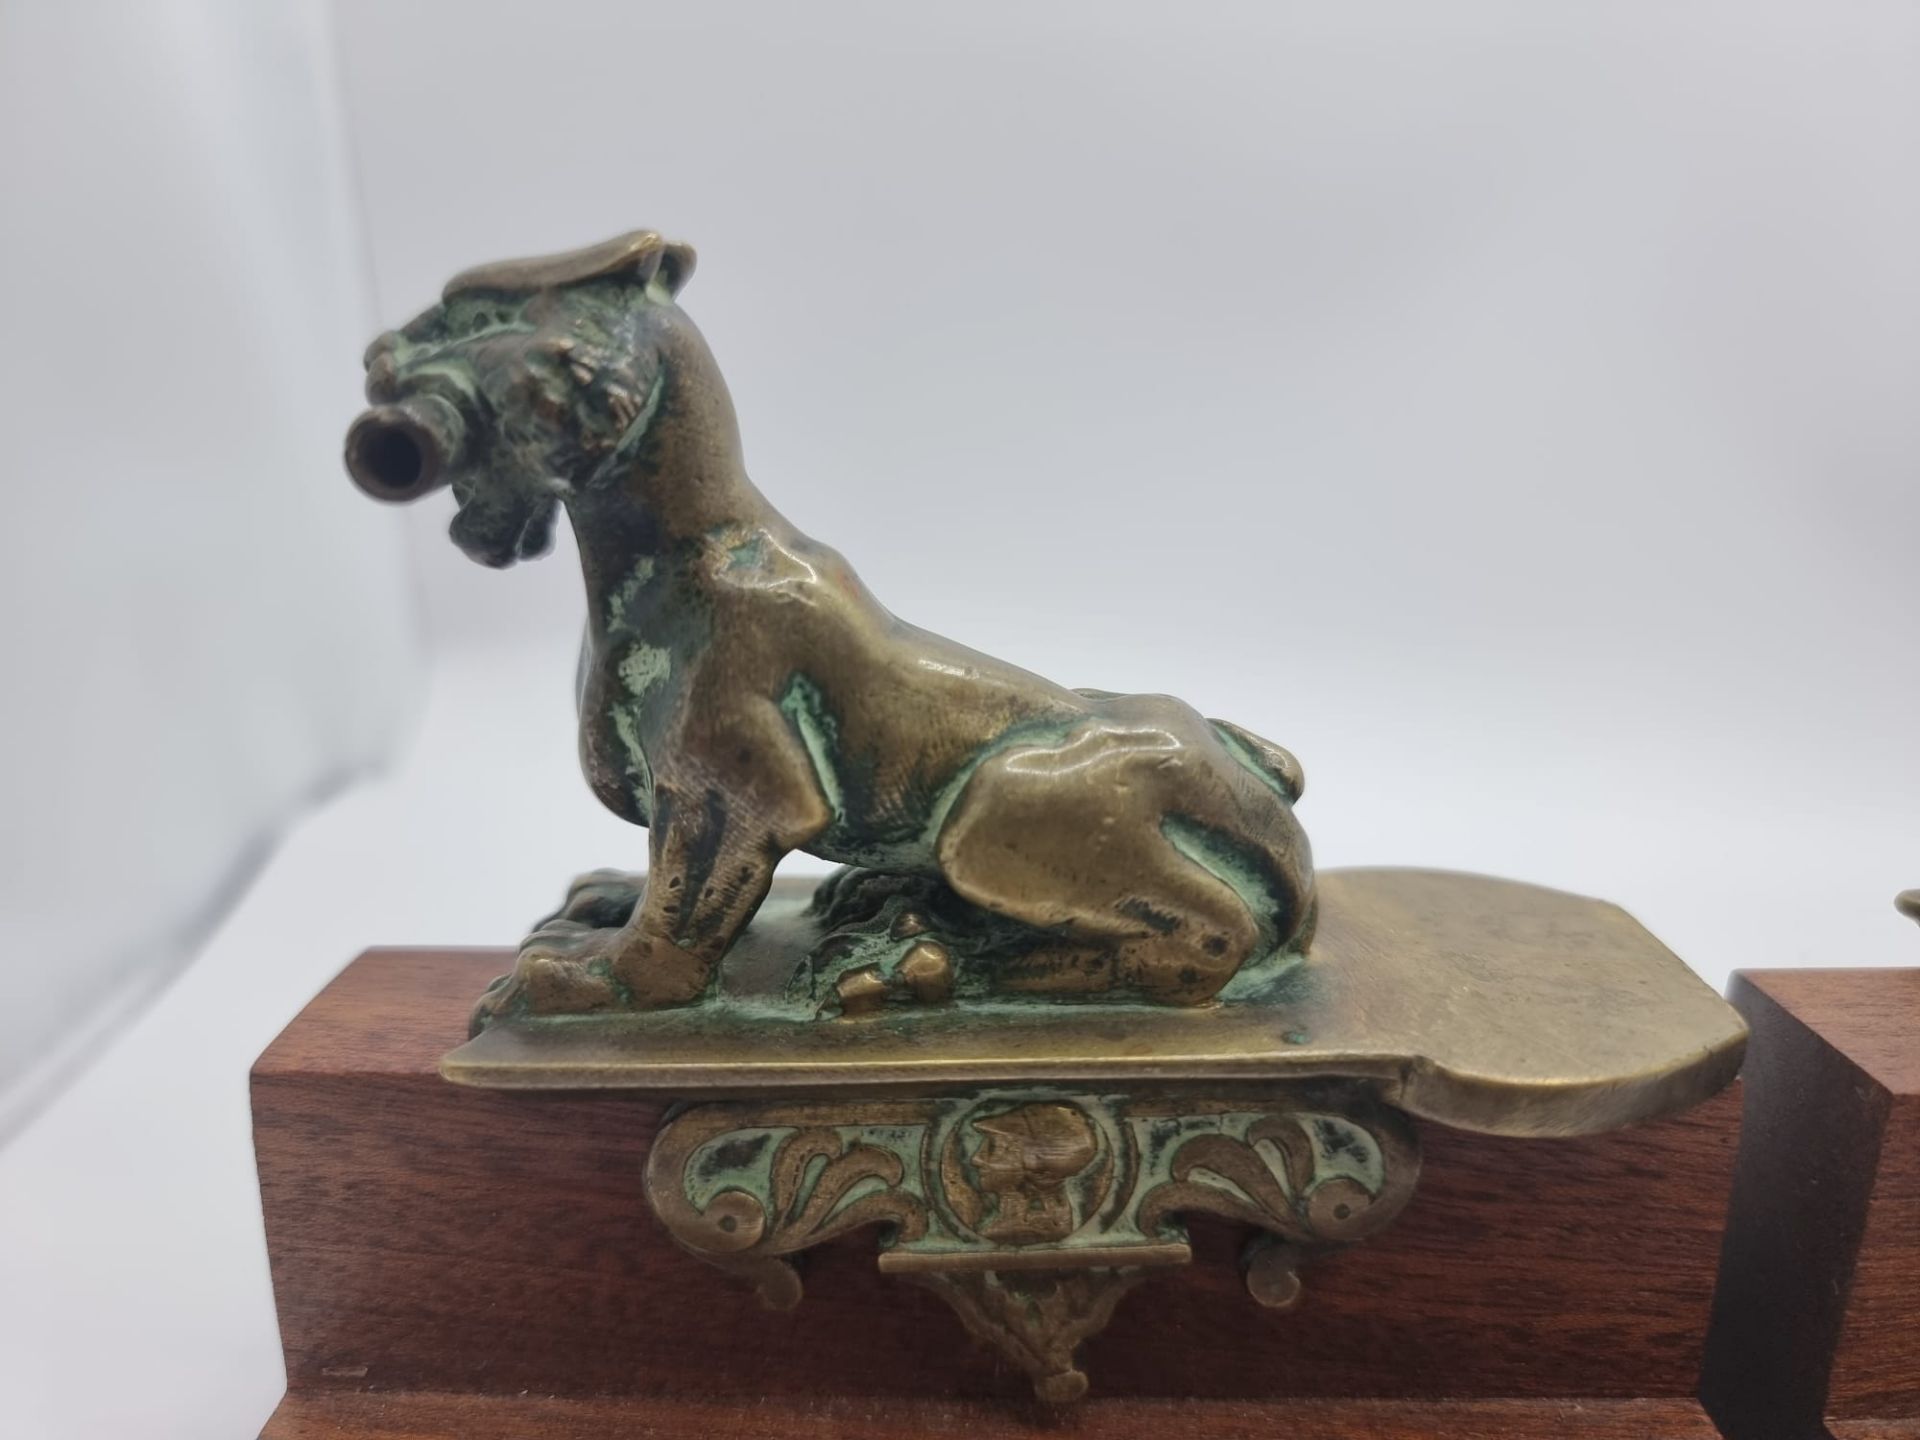 Pair Of 19th Century Decorative Bronze Lions later added to wooden plinth thus converted as Bookends - Image 4 of 10